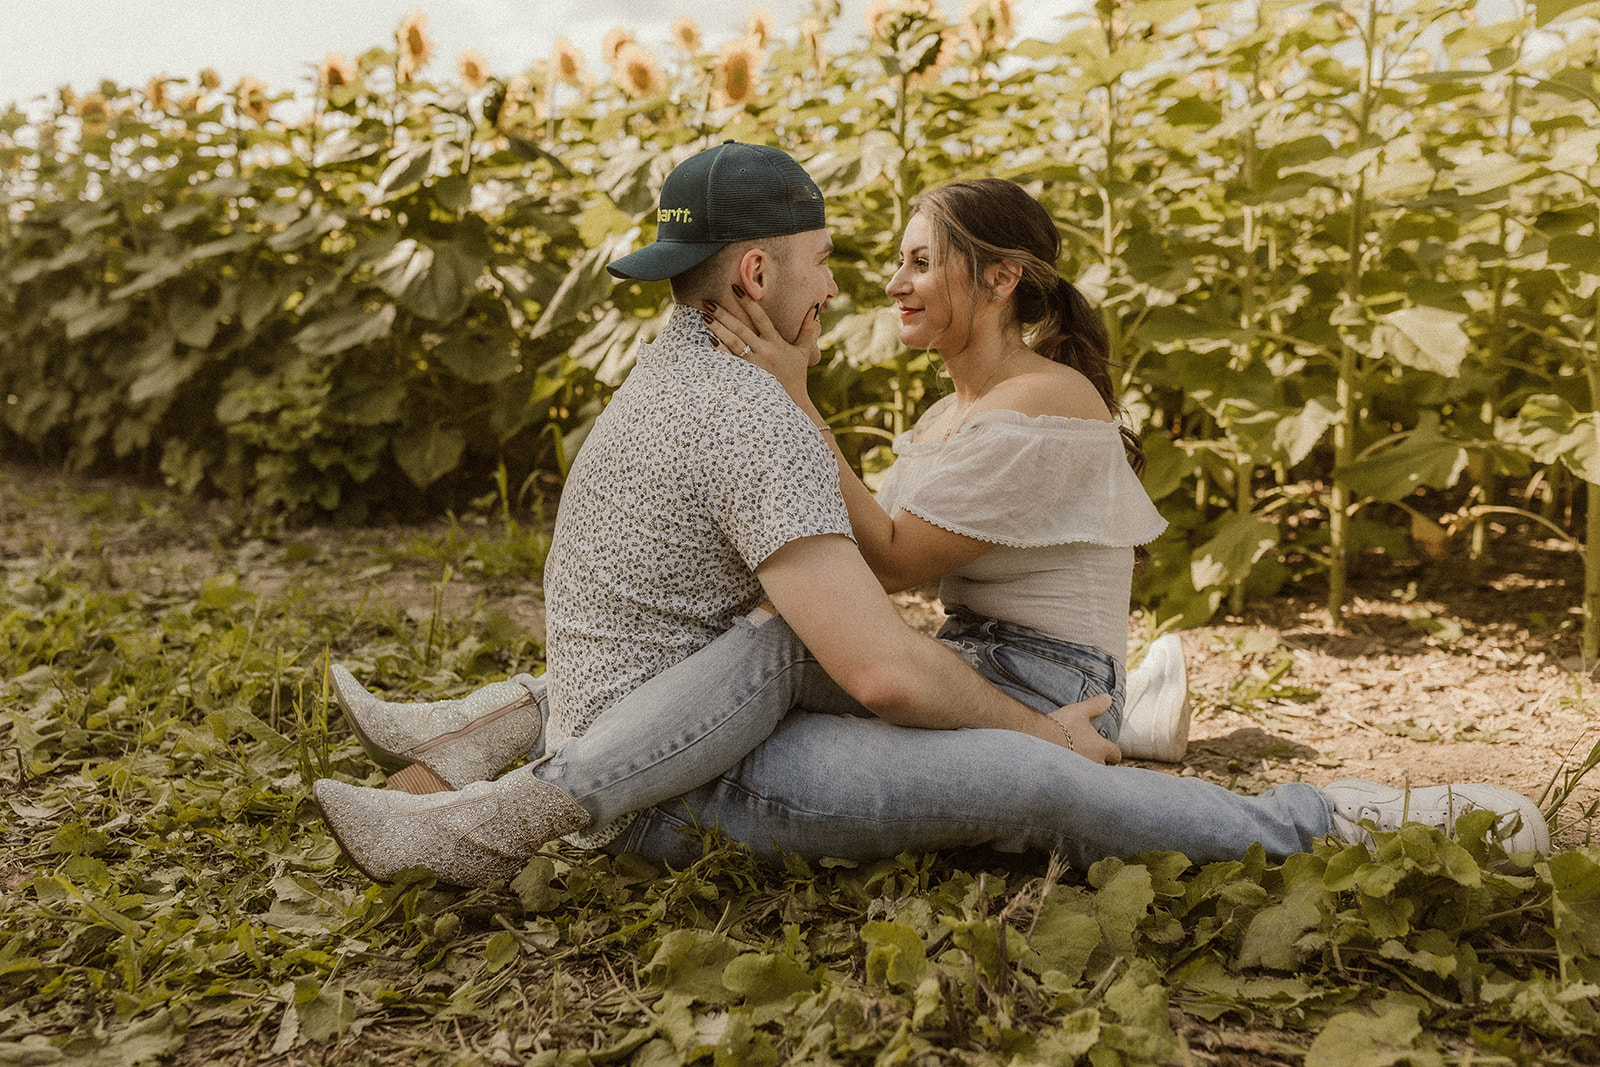 Fun and playful engagement photos in a sunflower field filled with adventurous moments